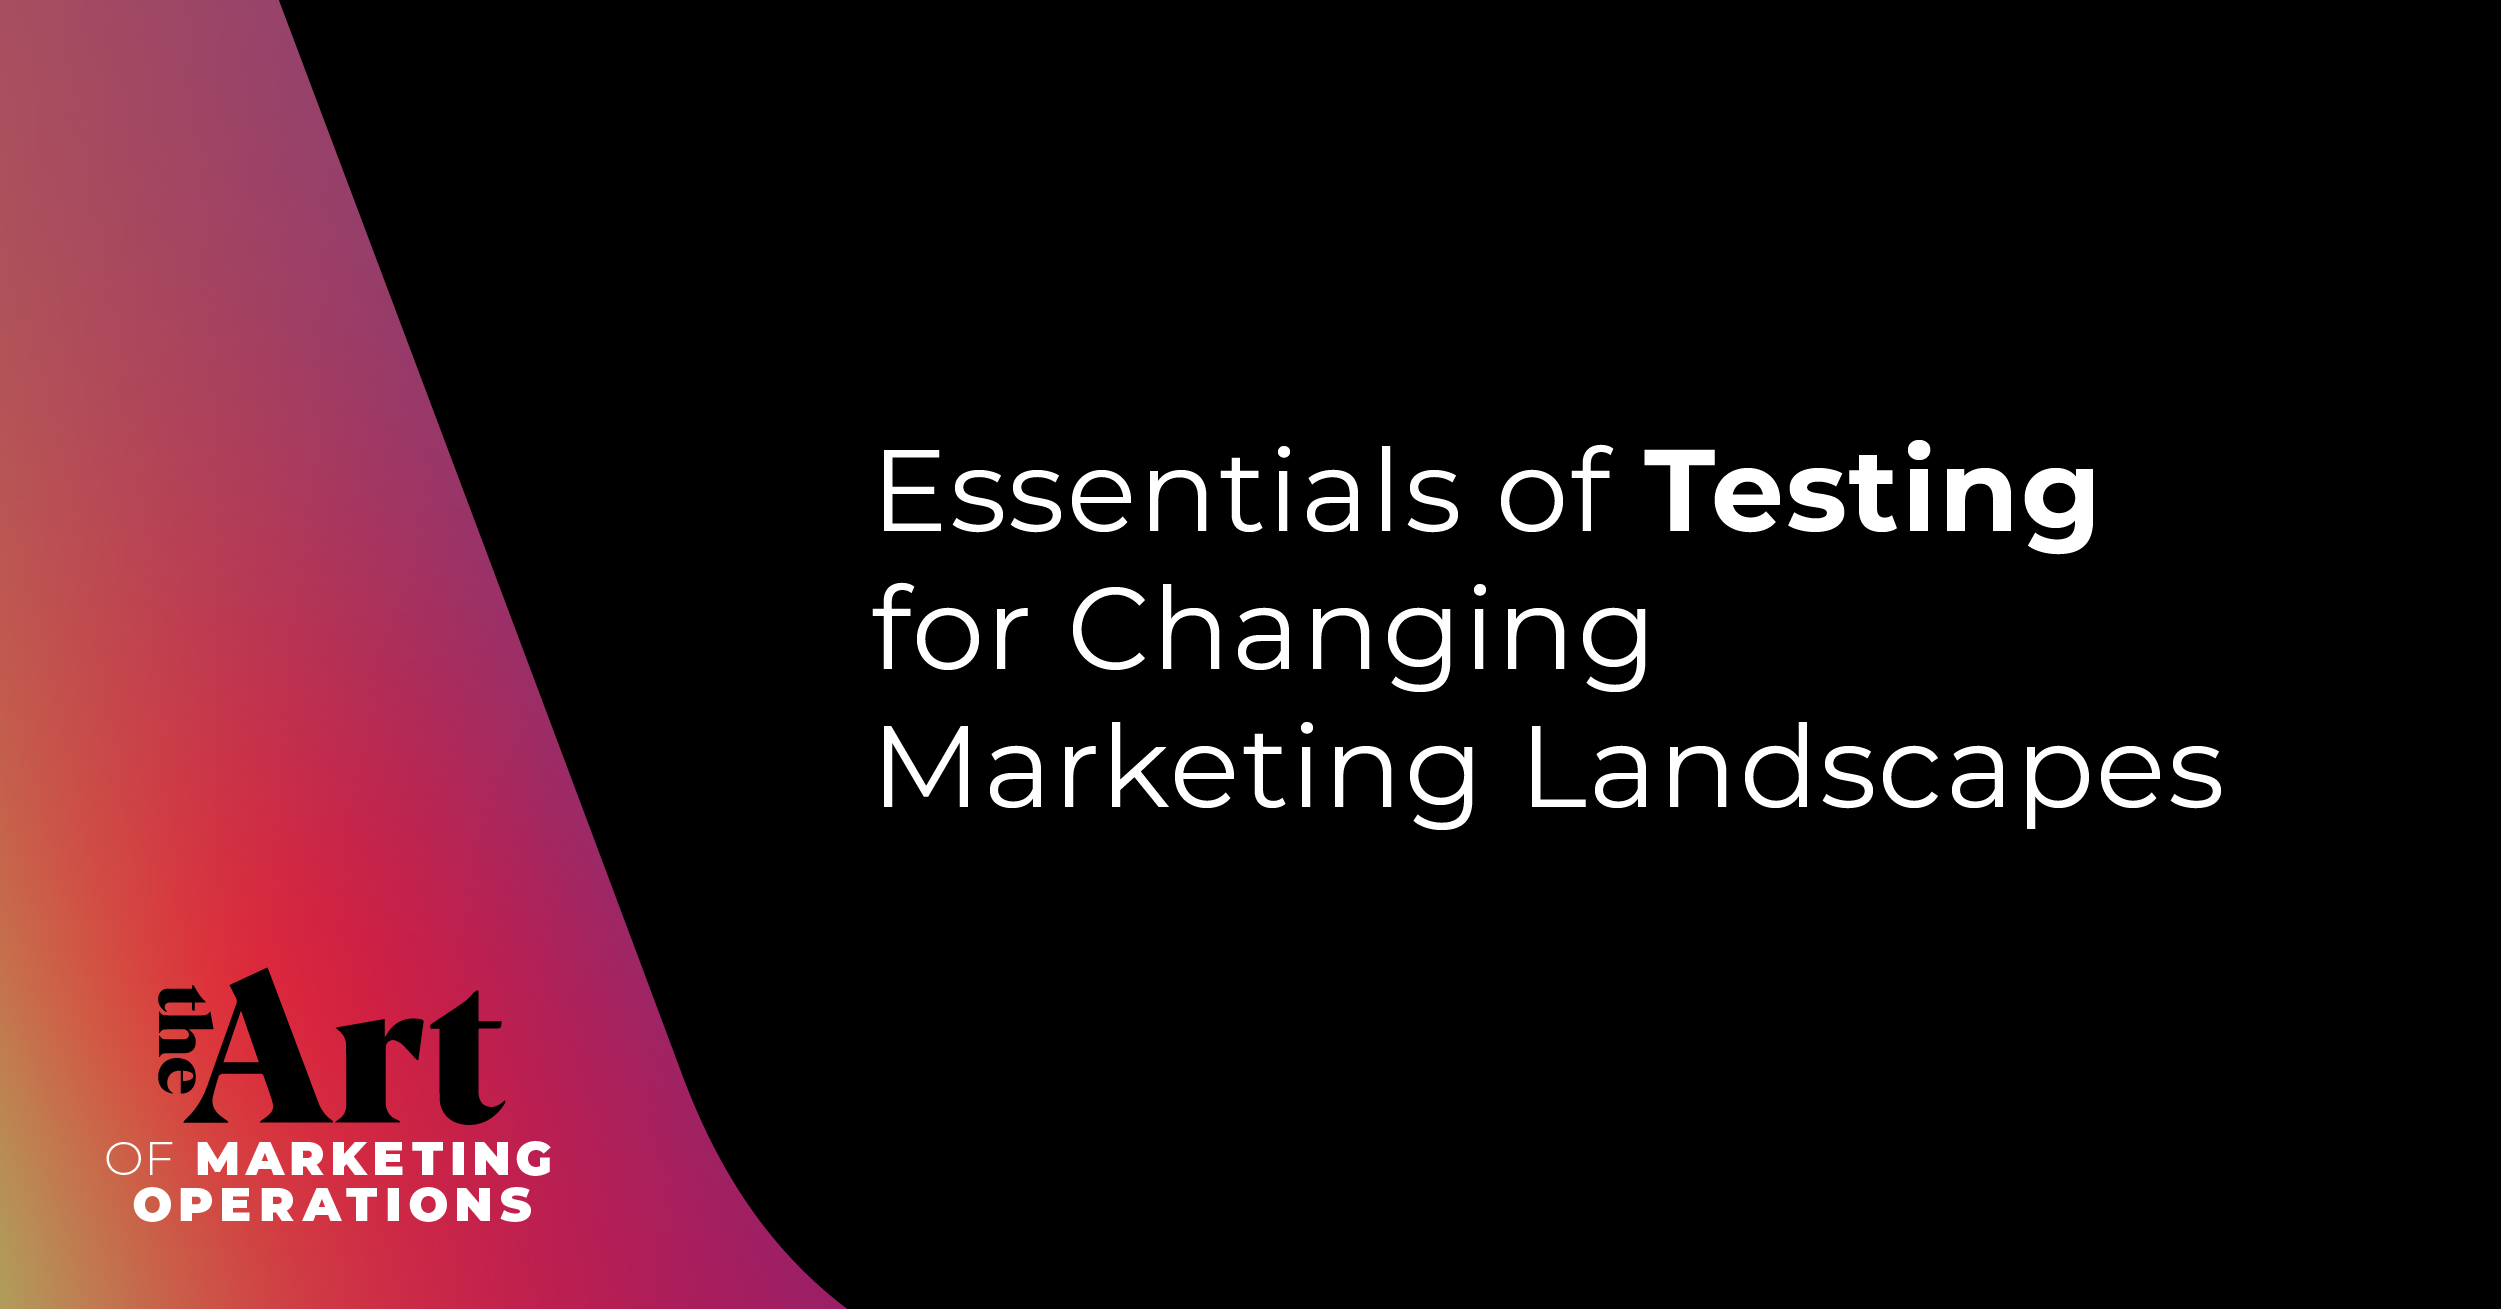 Essentials of Testing for Changing Marketing Landscapes